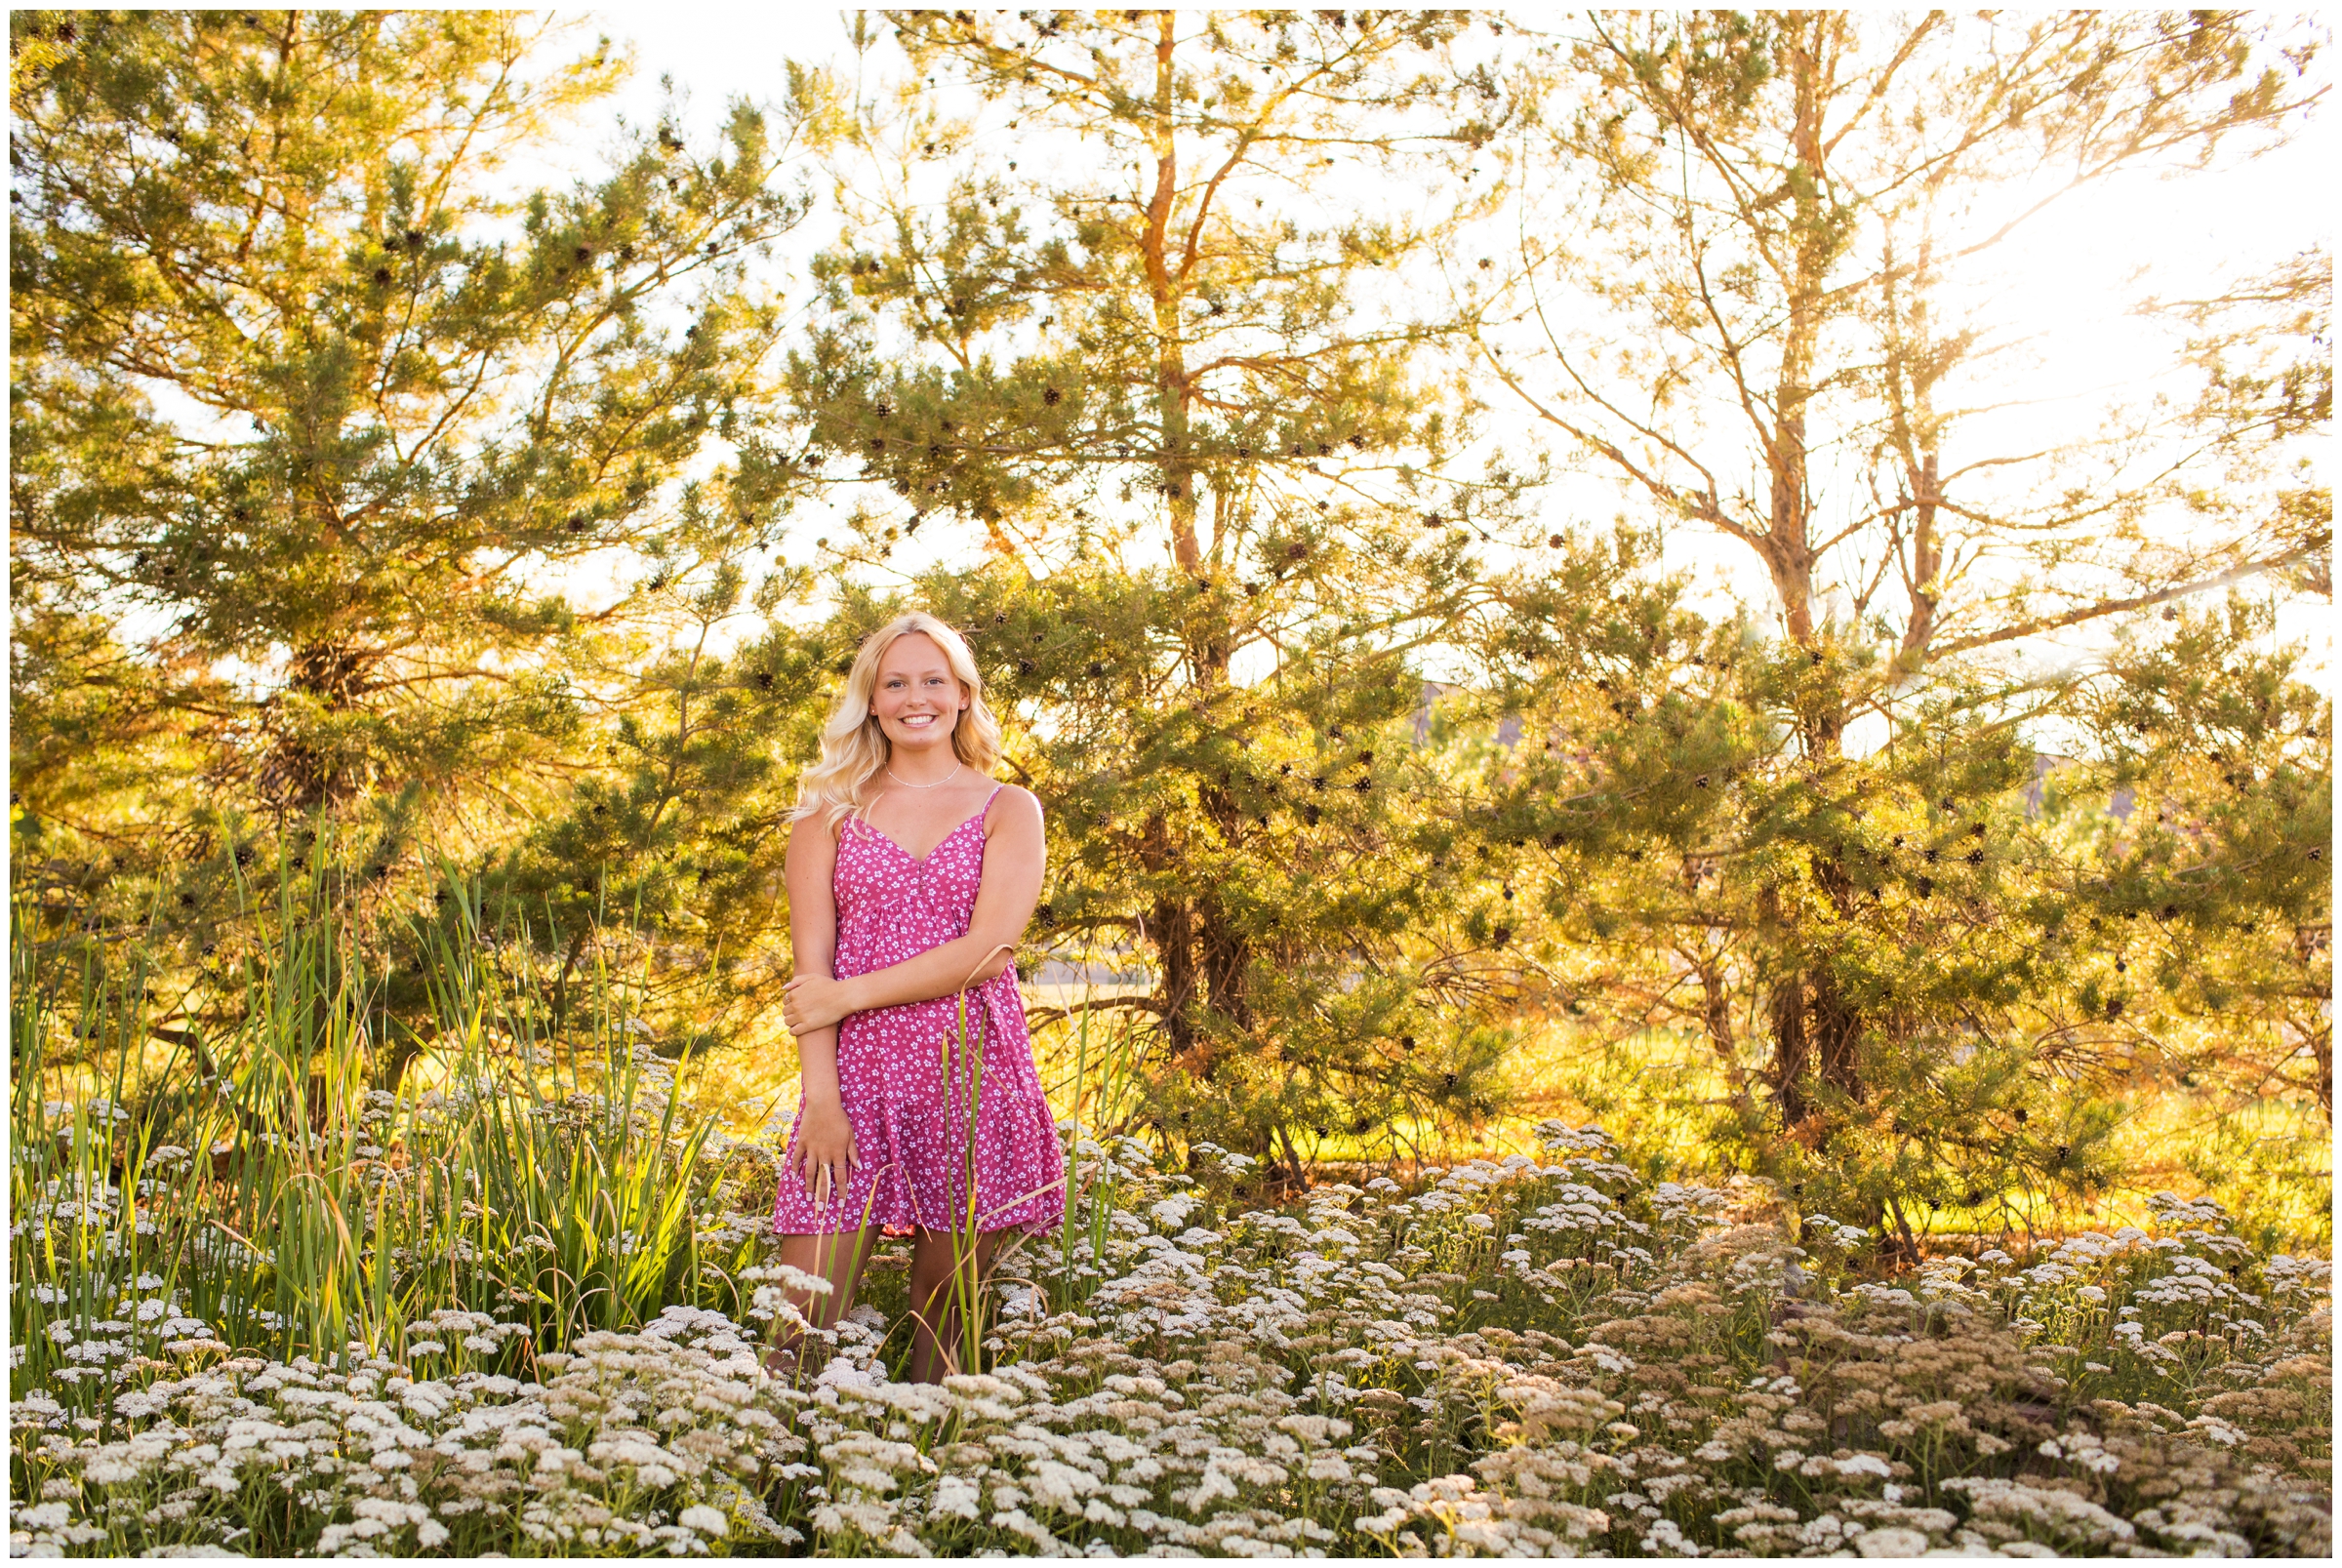 Erie senior portraits in a flower field by Northern Colorado photographer Plum Pretty Photography